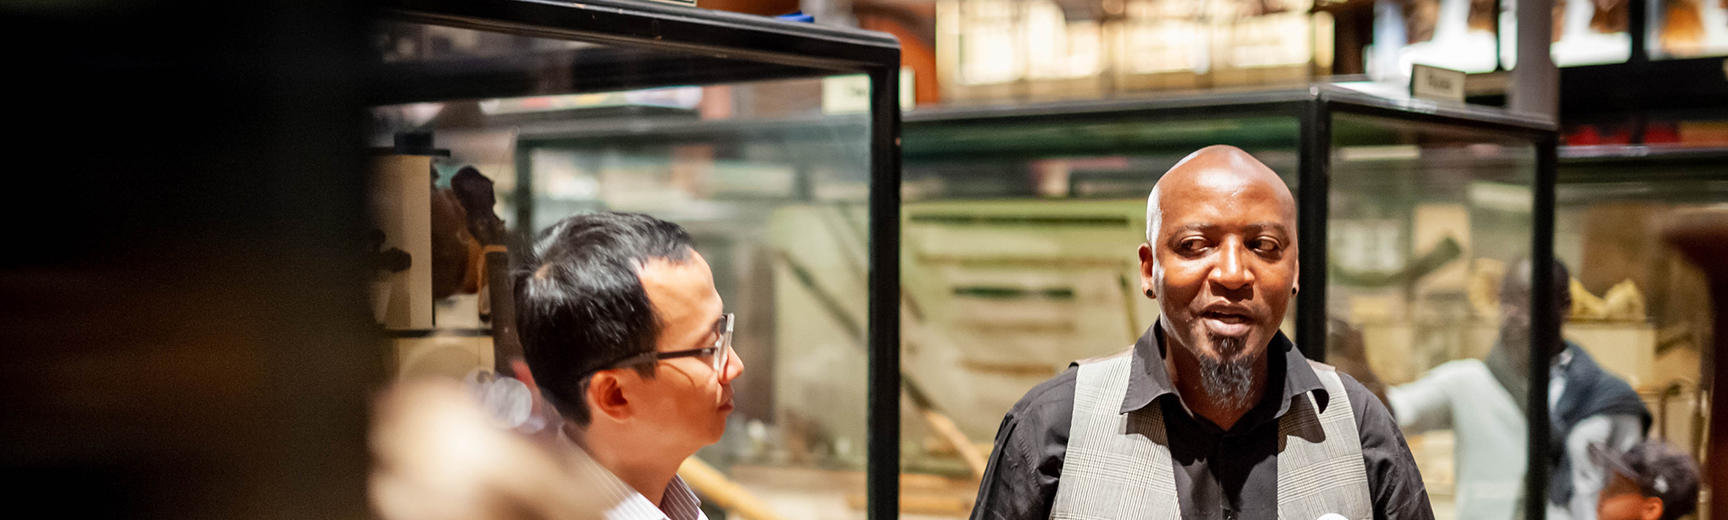 A man talks to a group of people gathered around a museum display case 